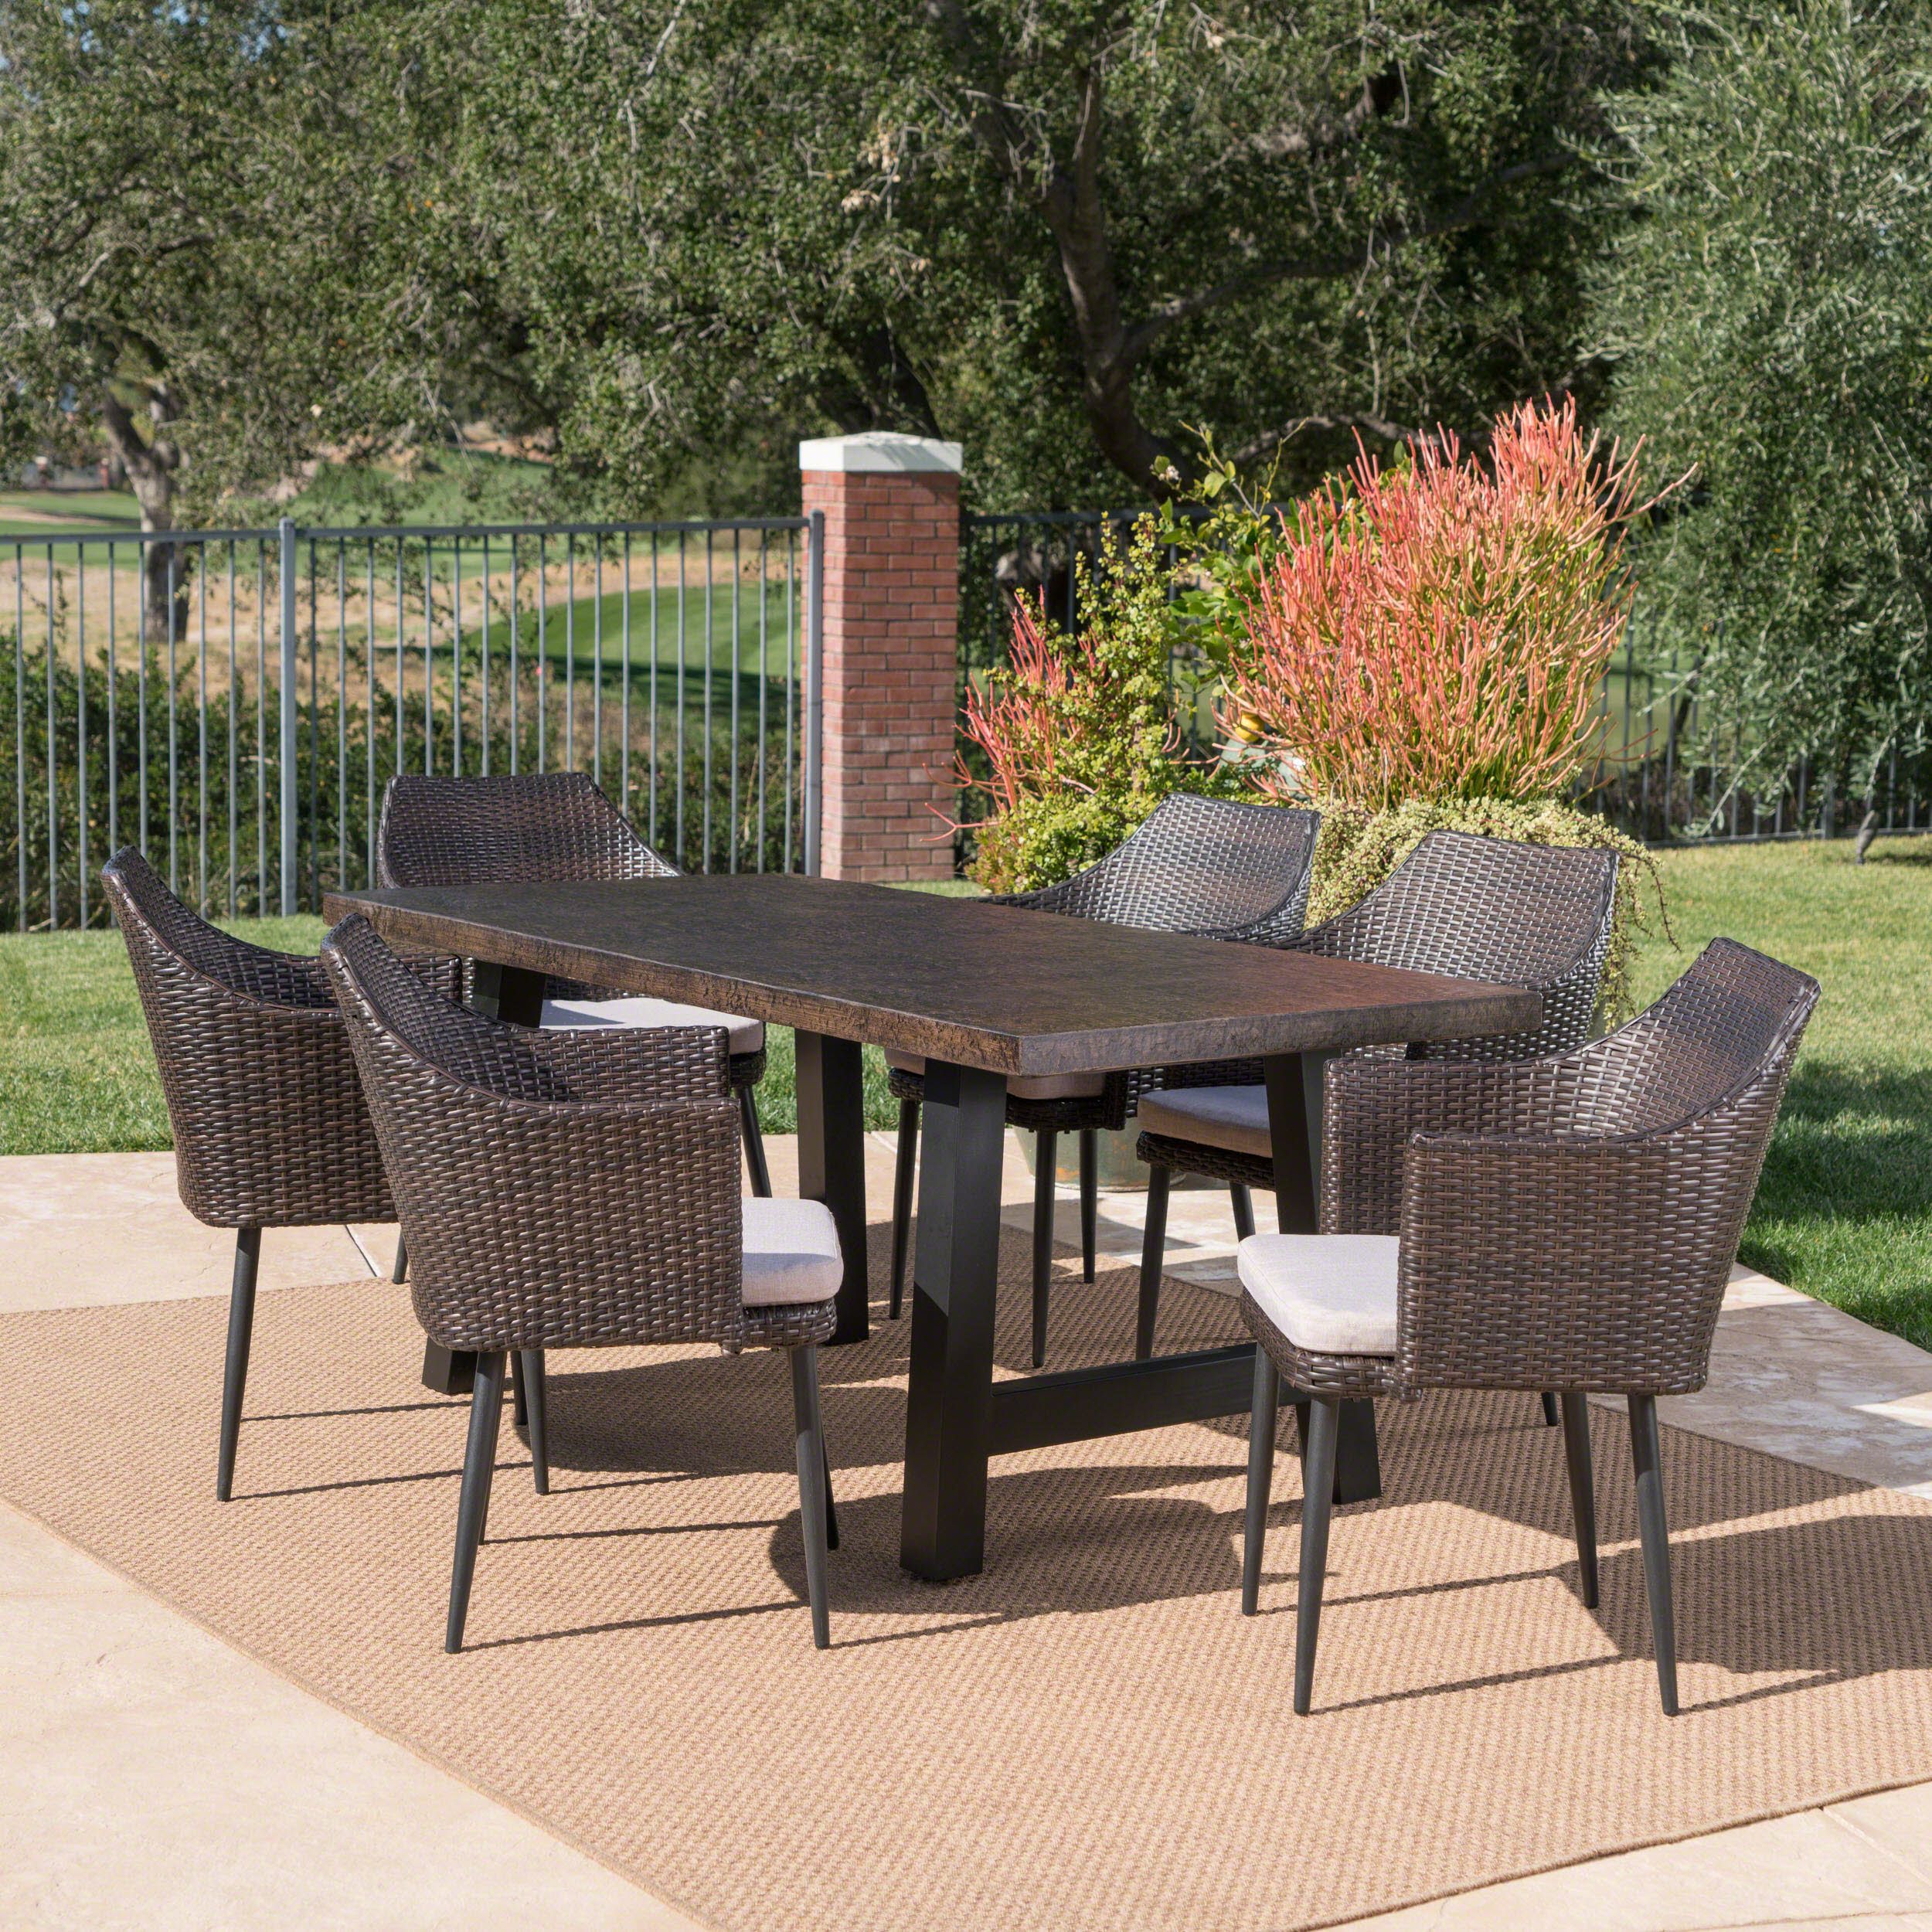 Porter Outdoor 7 Piece Wicker Dining Set With Light Weight Concrete With Rattan Wicker Outdoor Seating Sets (View 9 of 15)